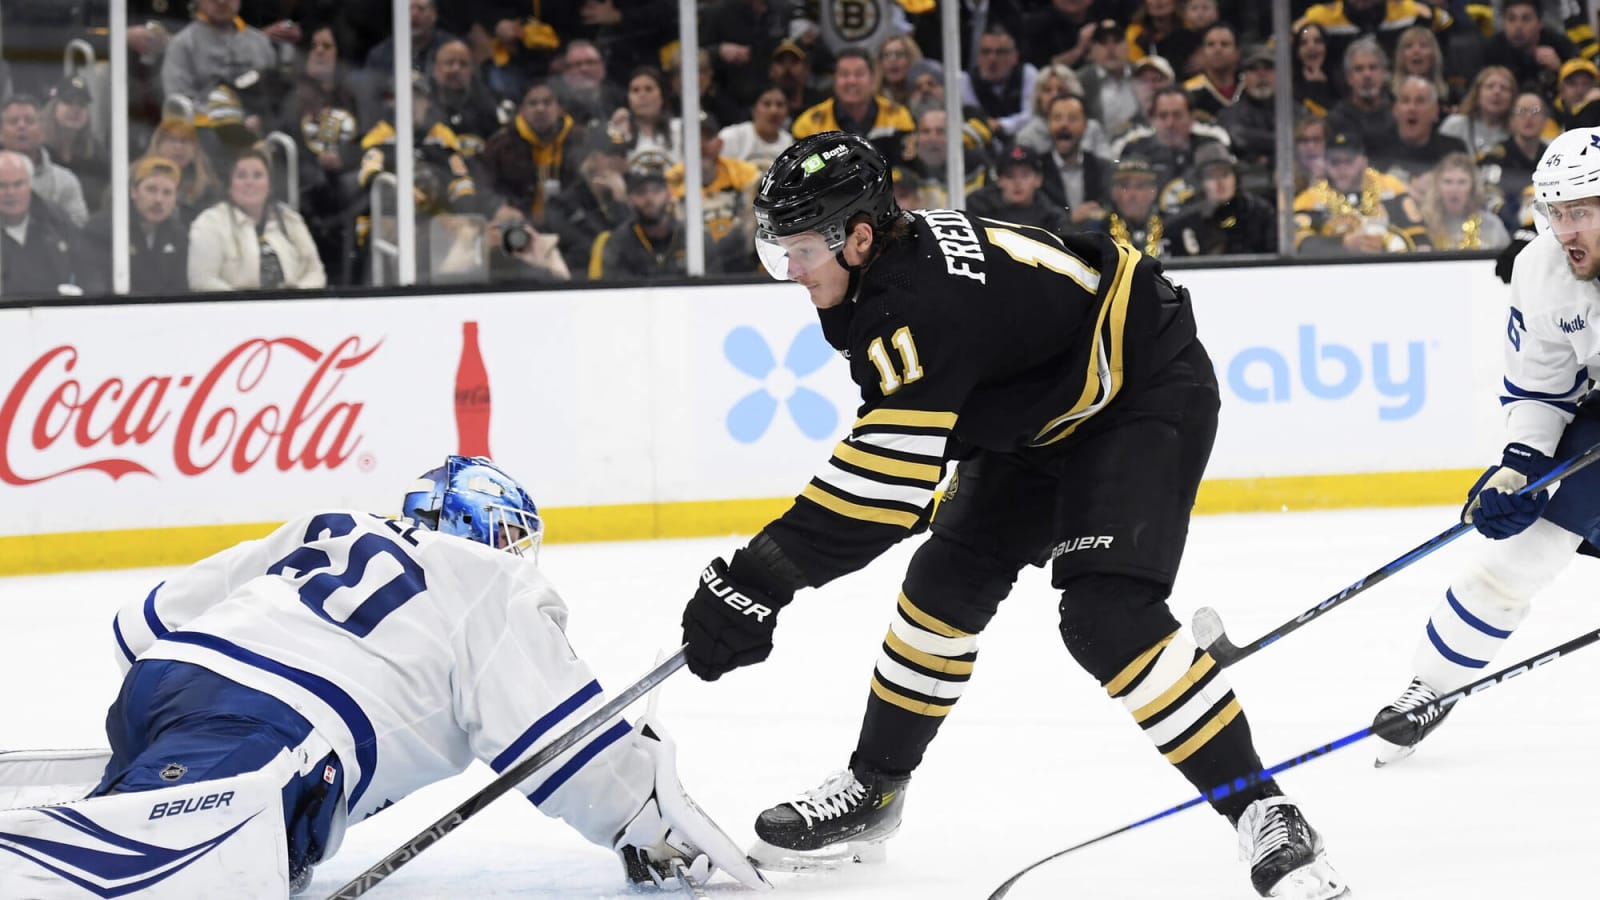 Auston Matthews In/Joseph Woll out as the Maple Leafs prepare for Game 7